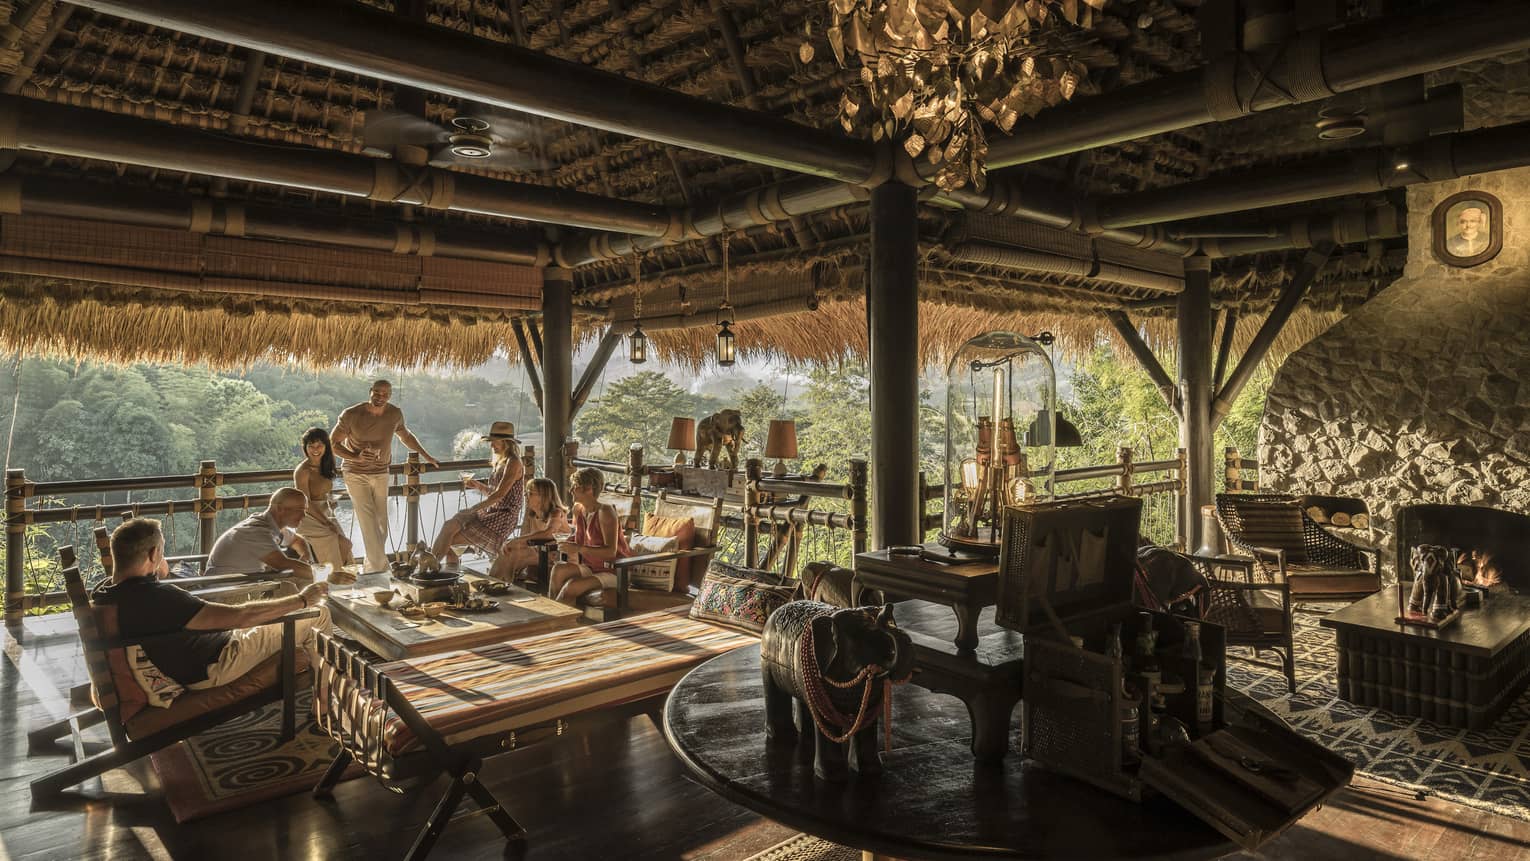 People hanging out at table in Burma Bar under thatched roof with water view